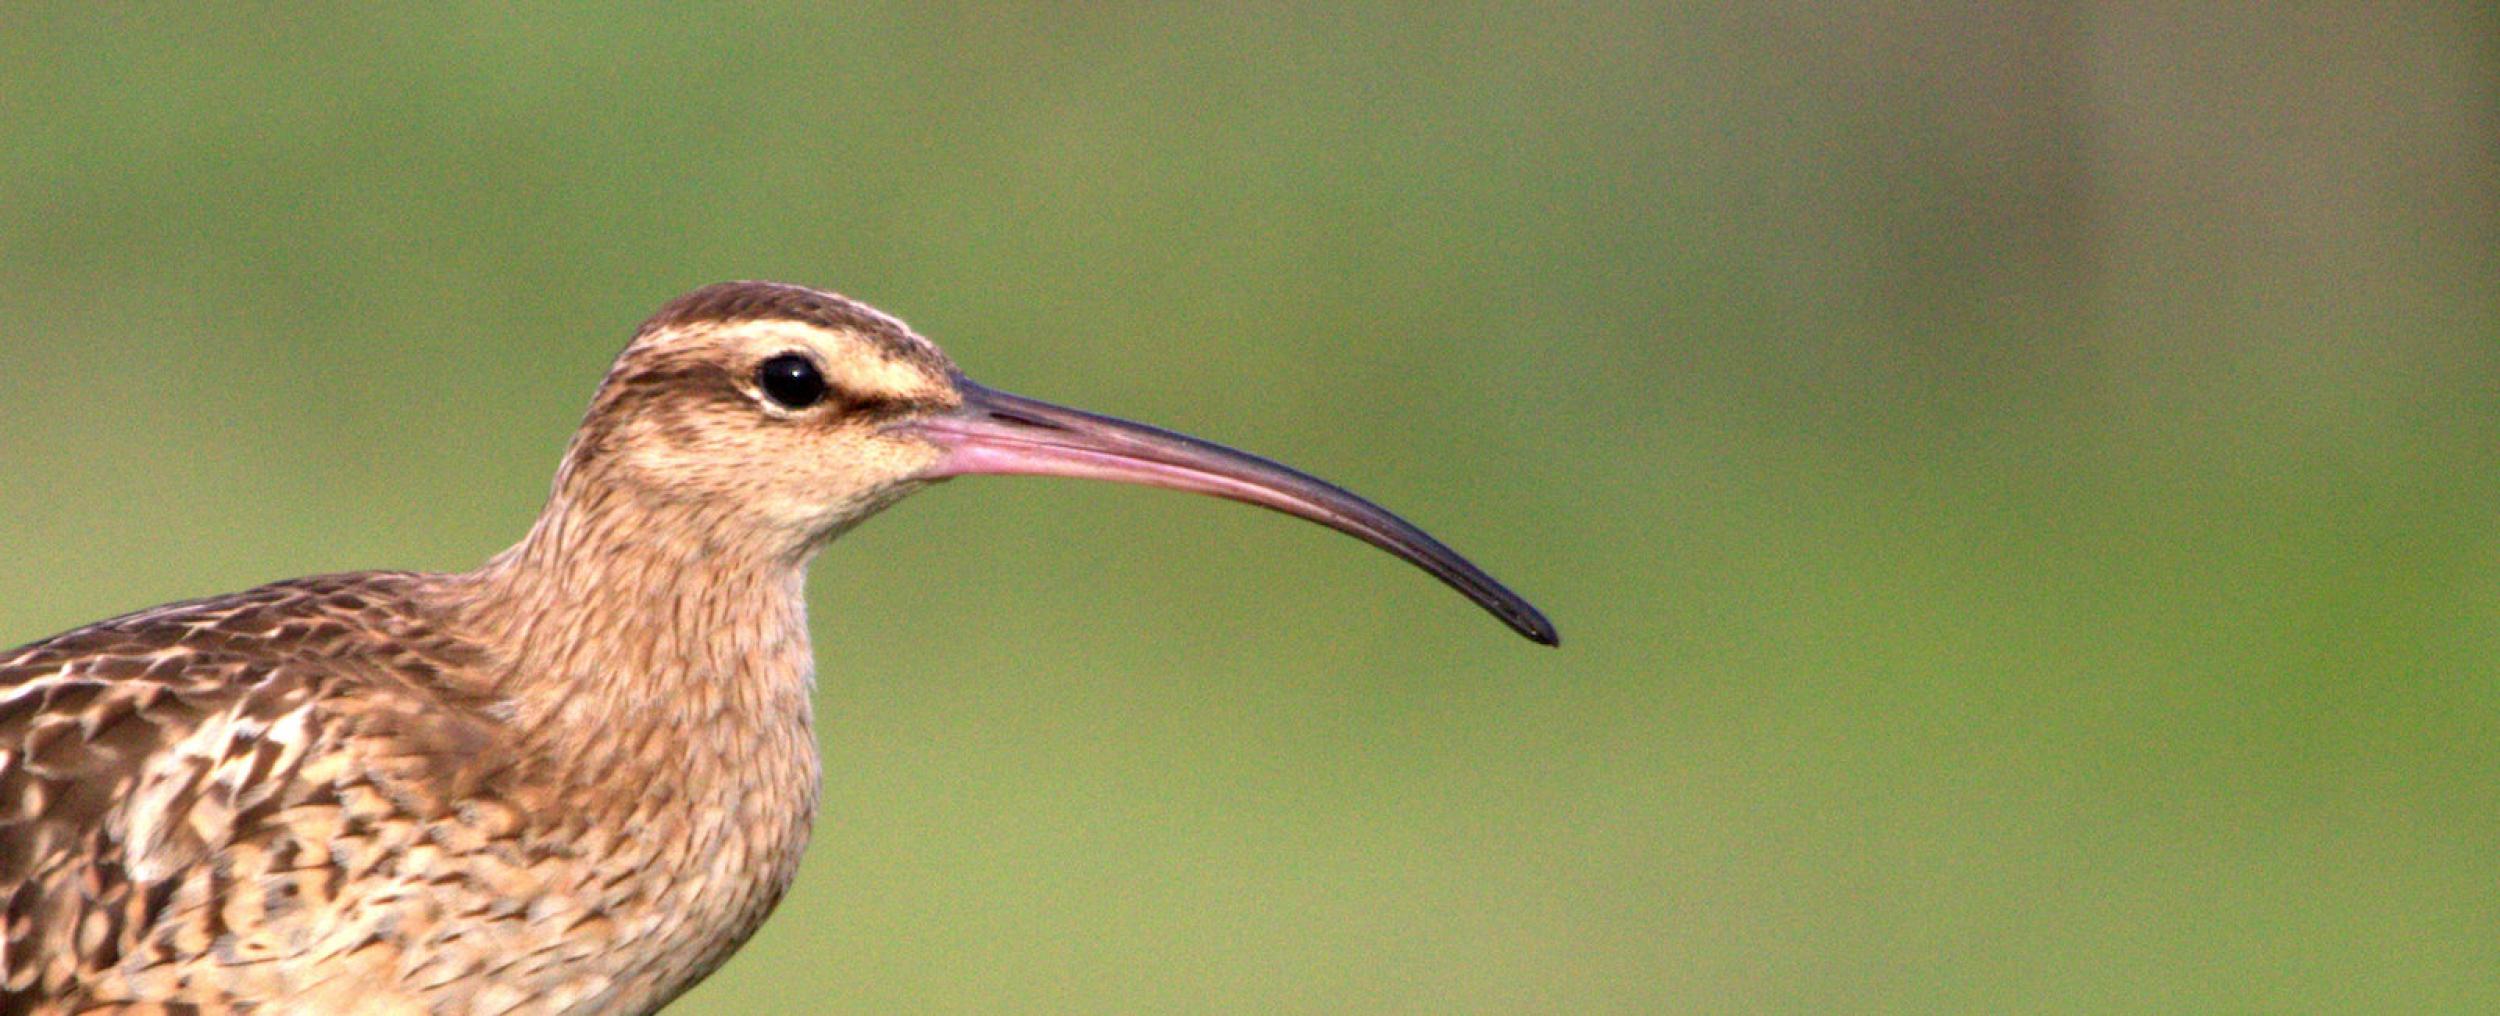 bristle-thighed curlew